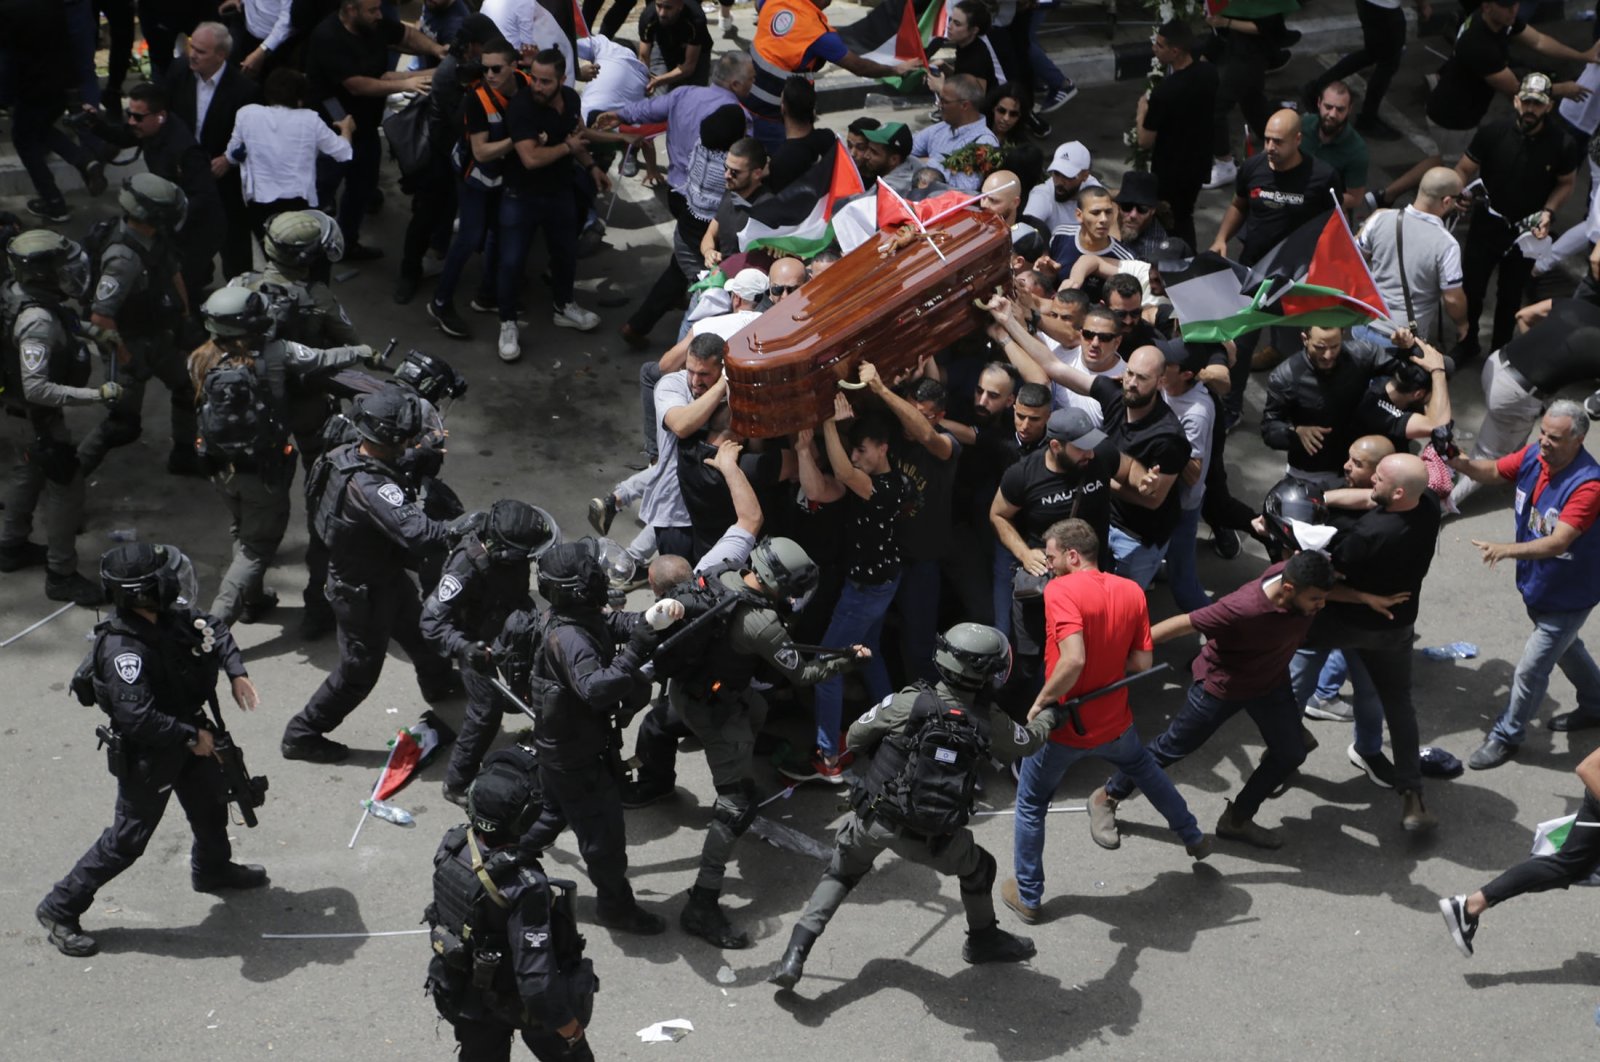 Israeli police attack mourners as they carry the casket of slain Al-Jazeera veteran journalist Shireen Abu Akleh during her funeral, East Jerusalem, occupied Palestine, May 13, 2022. (AP Photo)